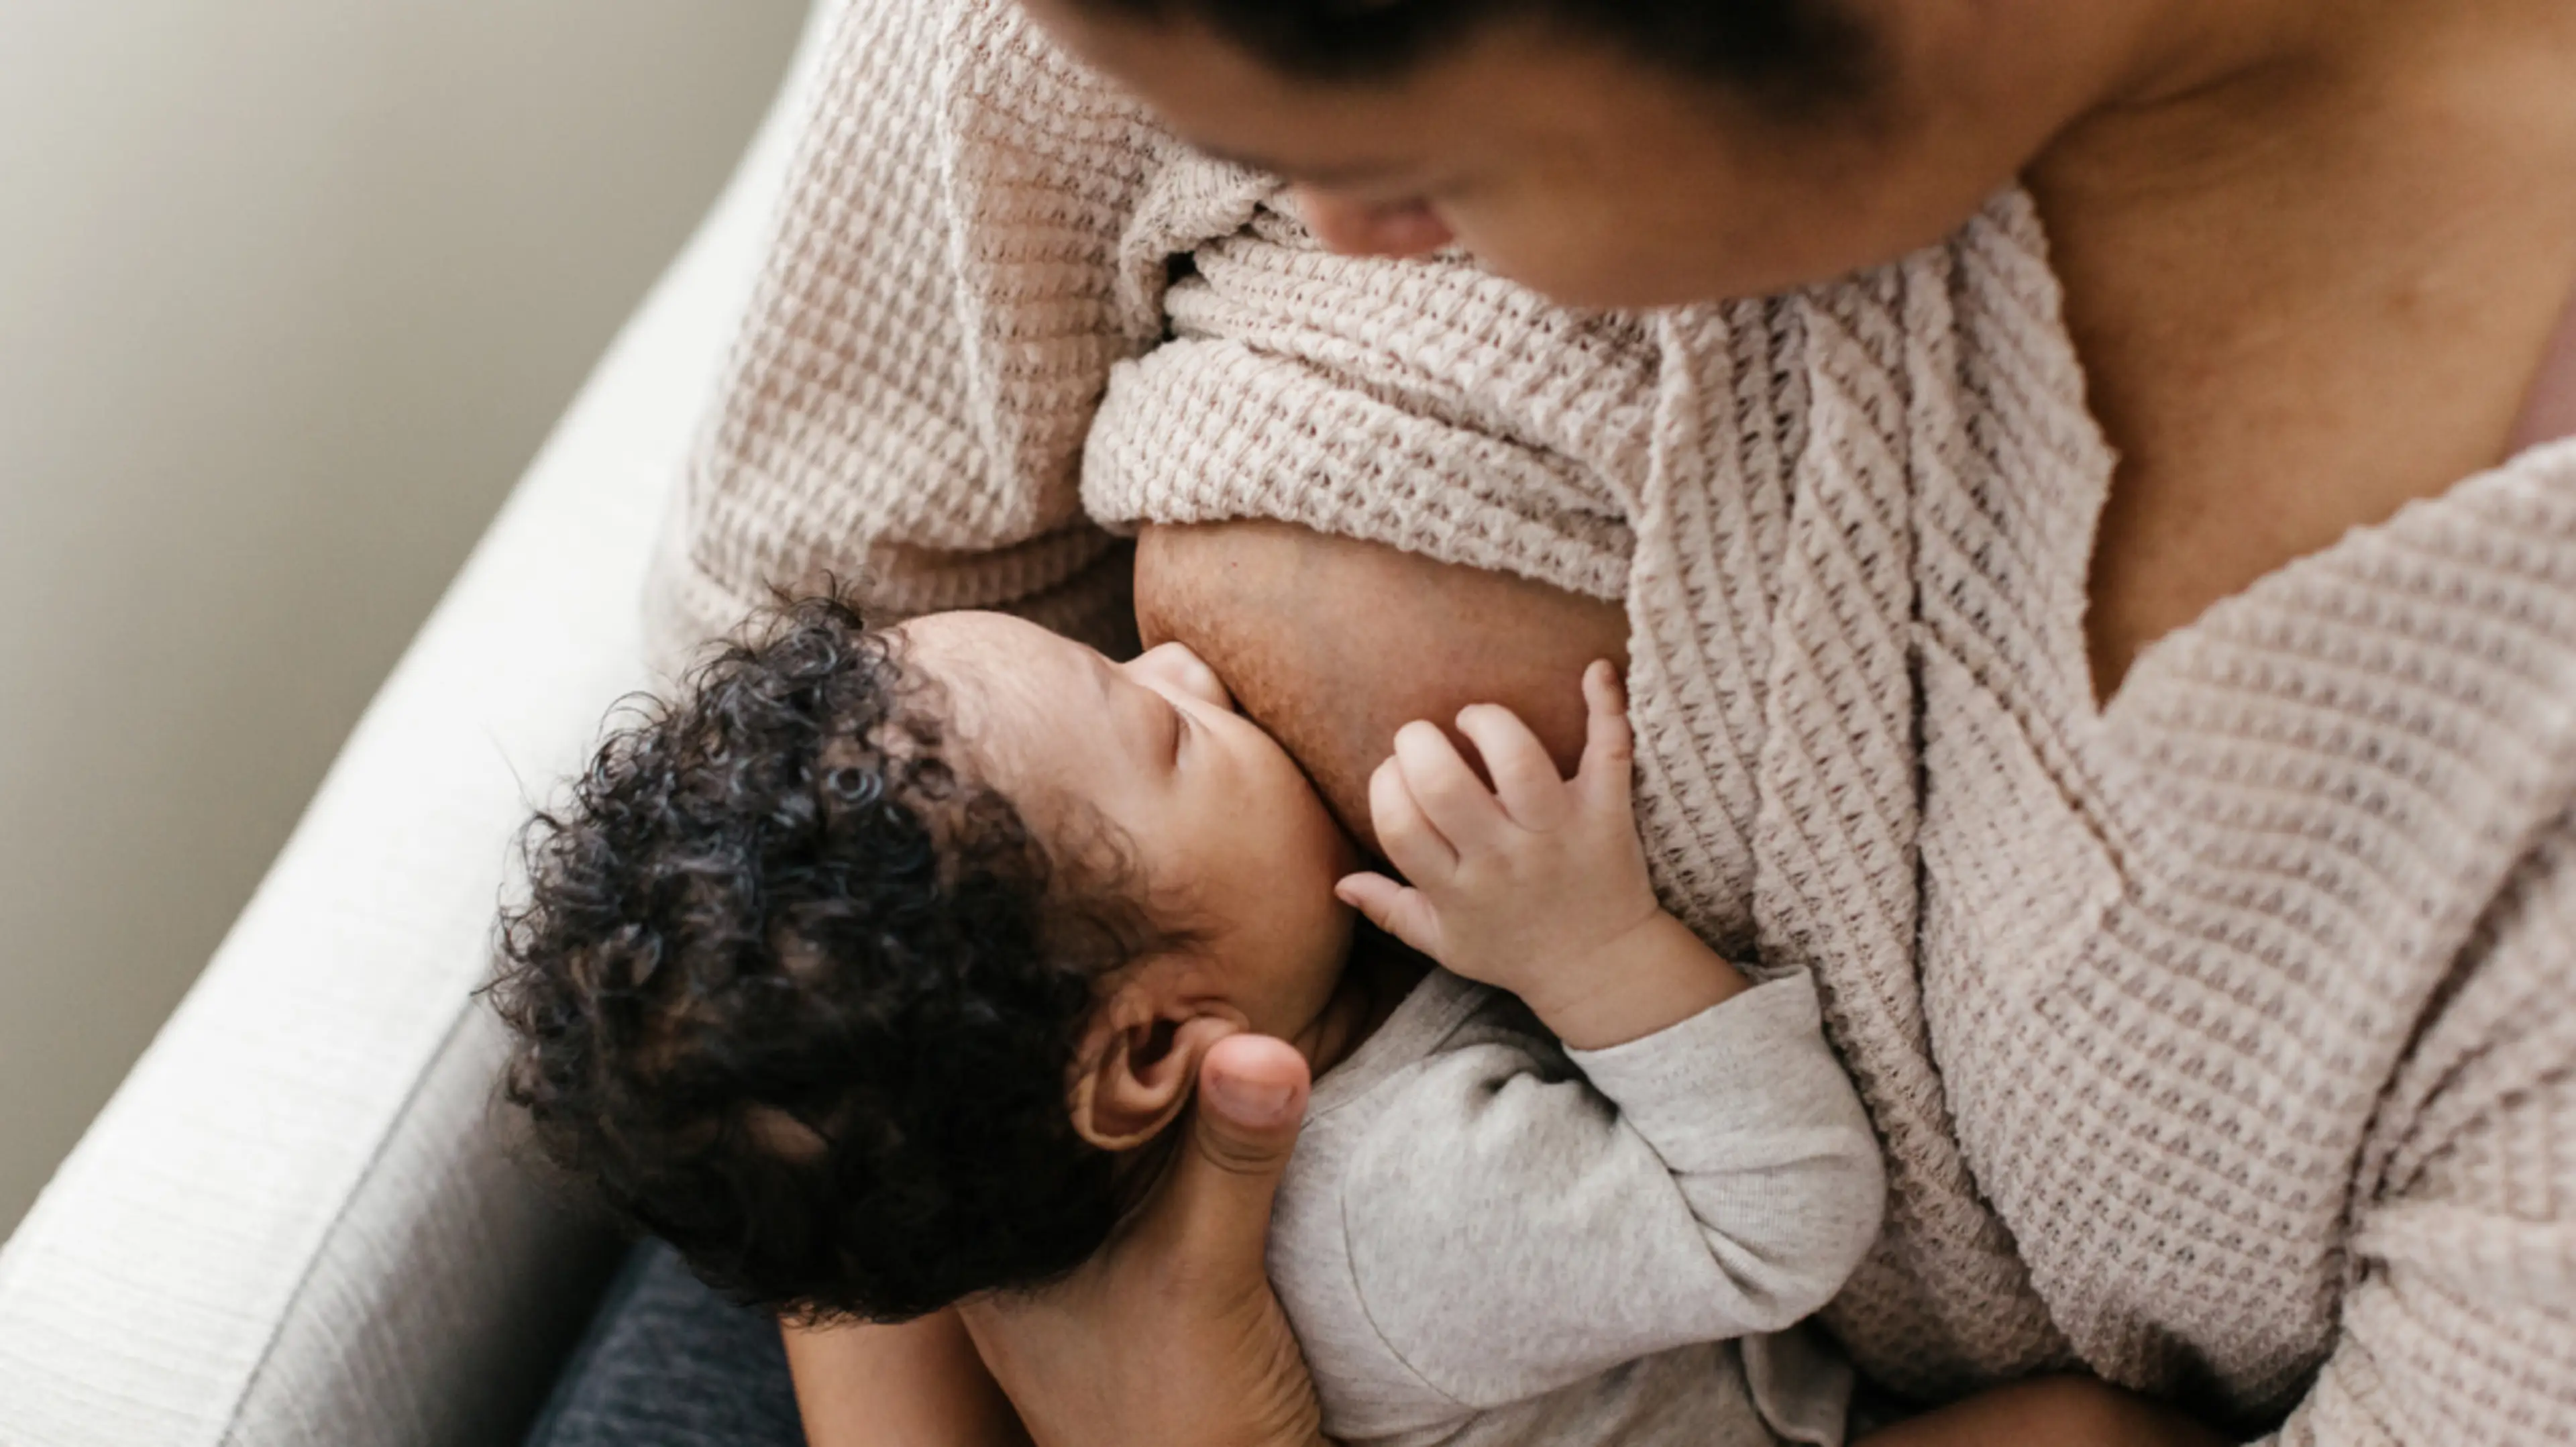 Lactation Consultant Q+A: 5 Unexpected Truths About Breastfeeding